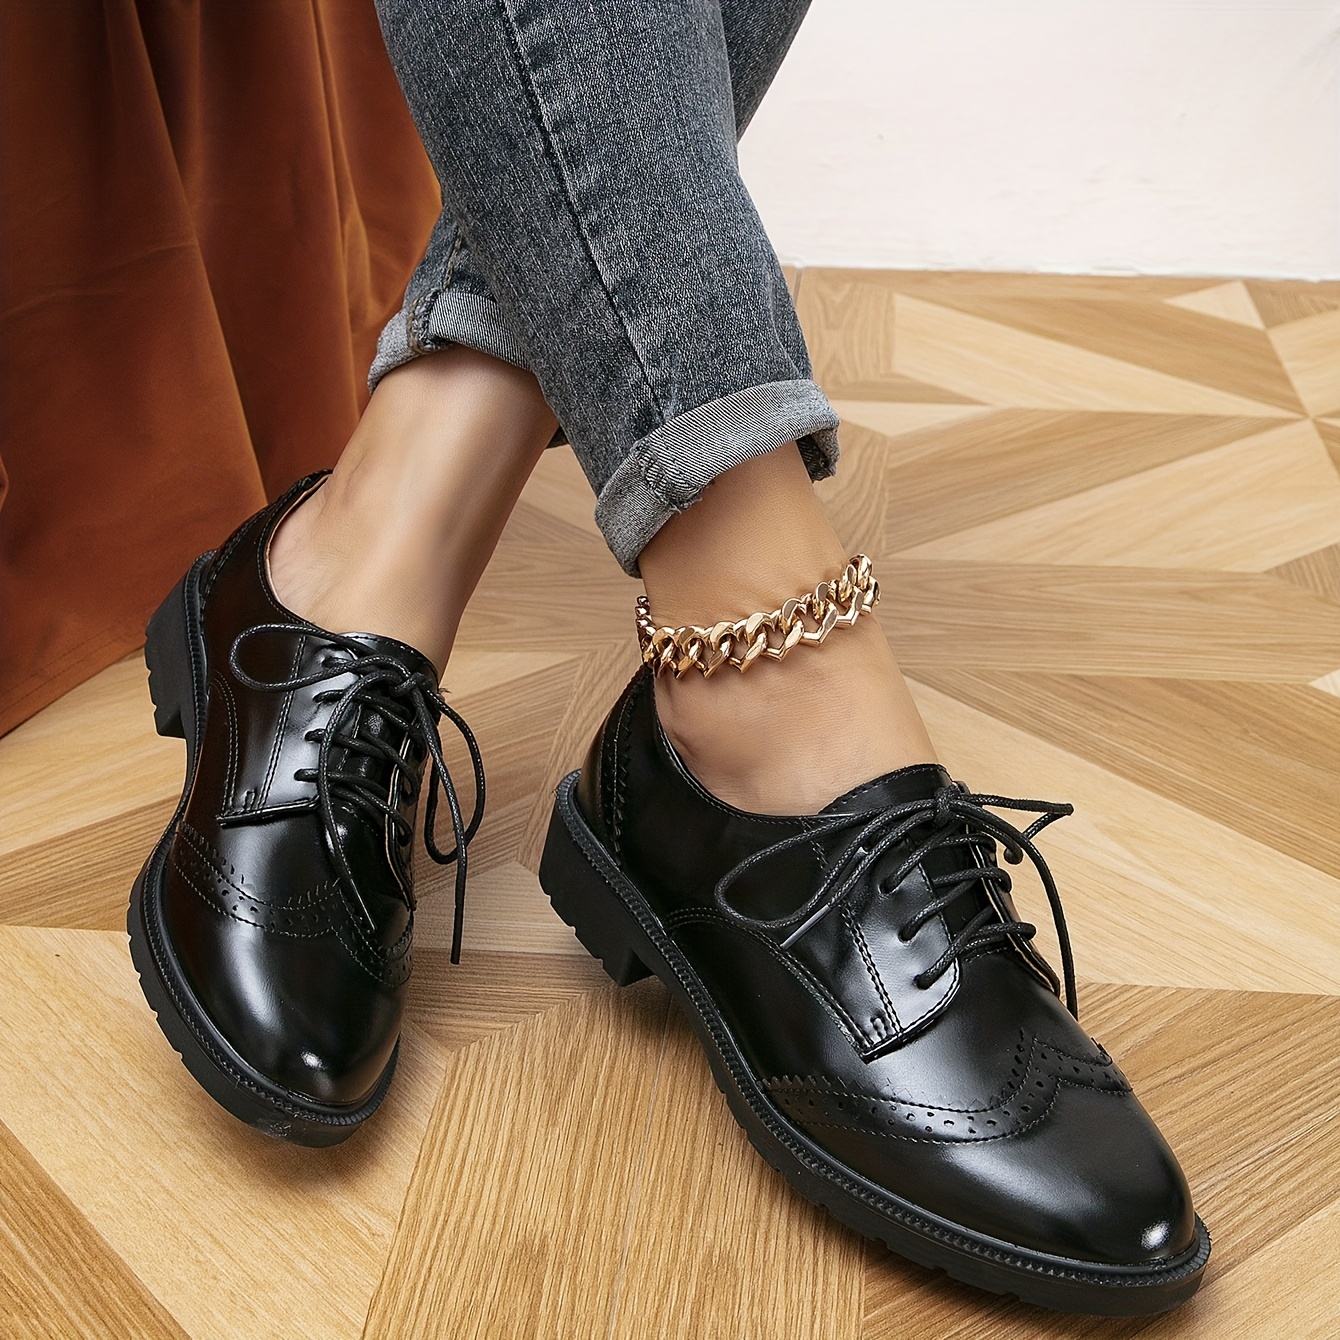 Women's Patent Leather Shoes